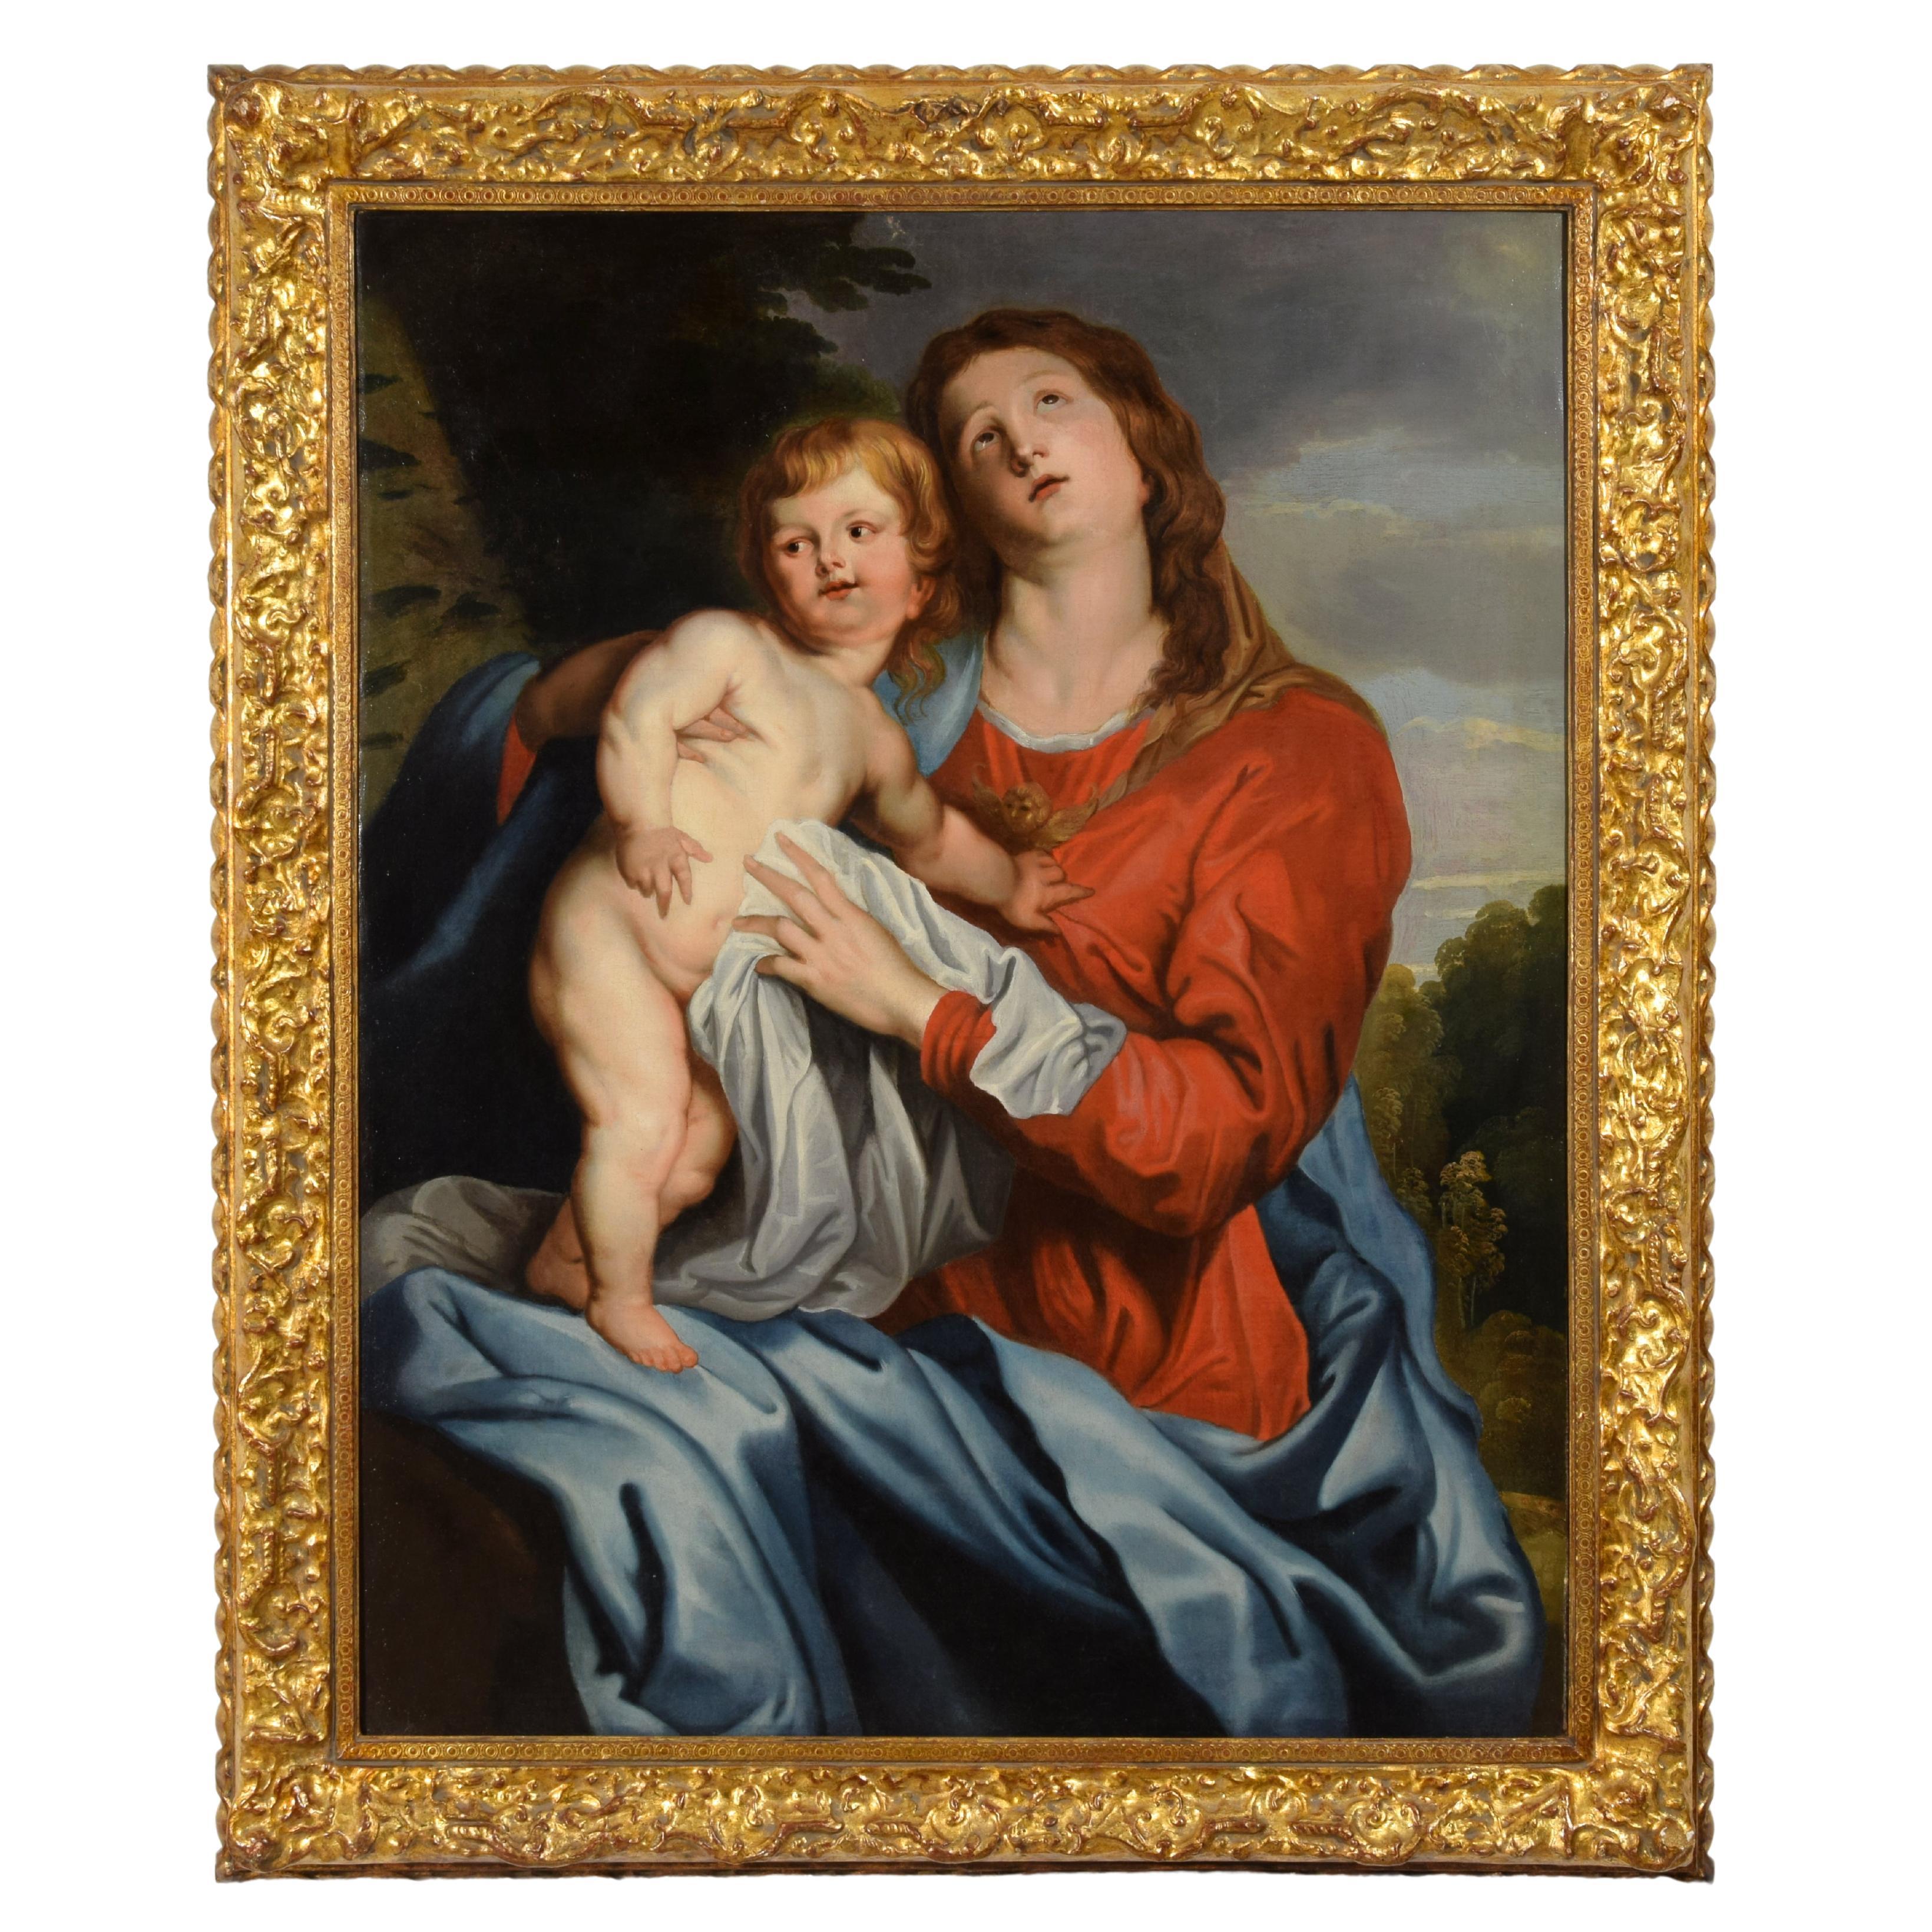 17th Century, Italian Painting with Virgin and Child by Follower of Van Dyck